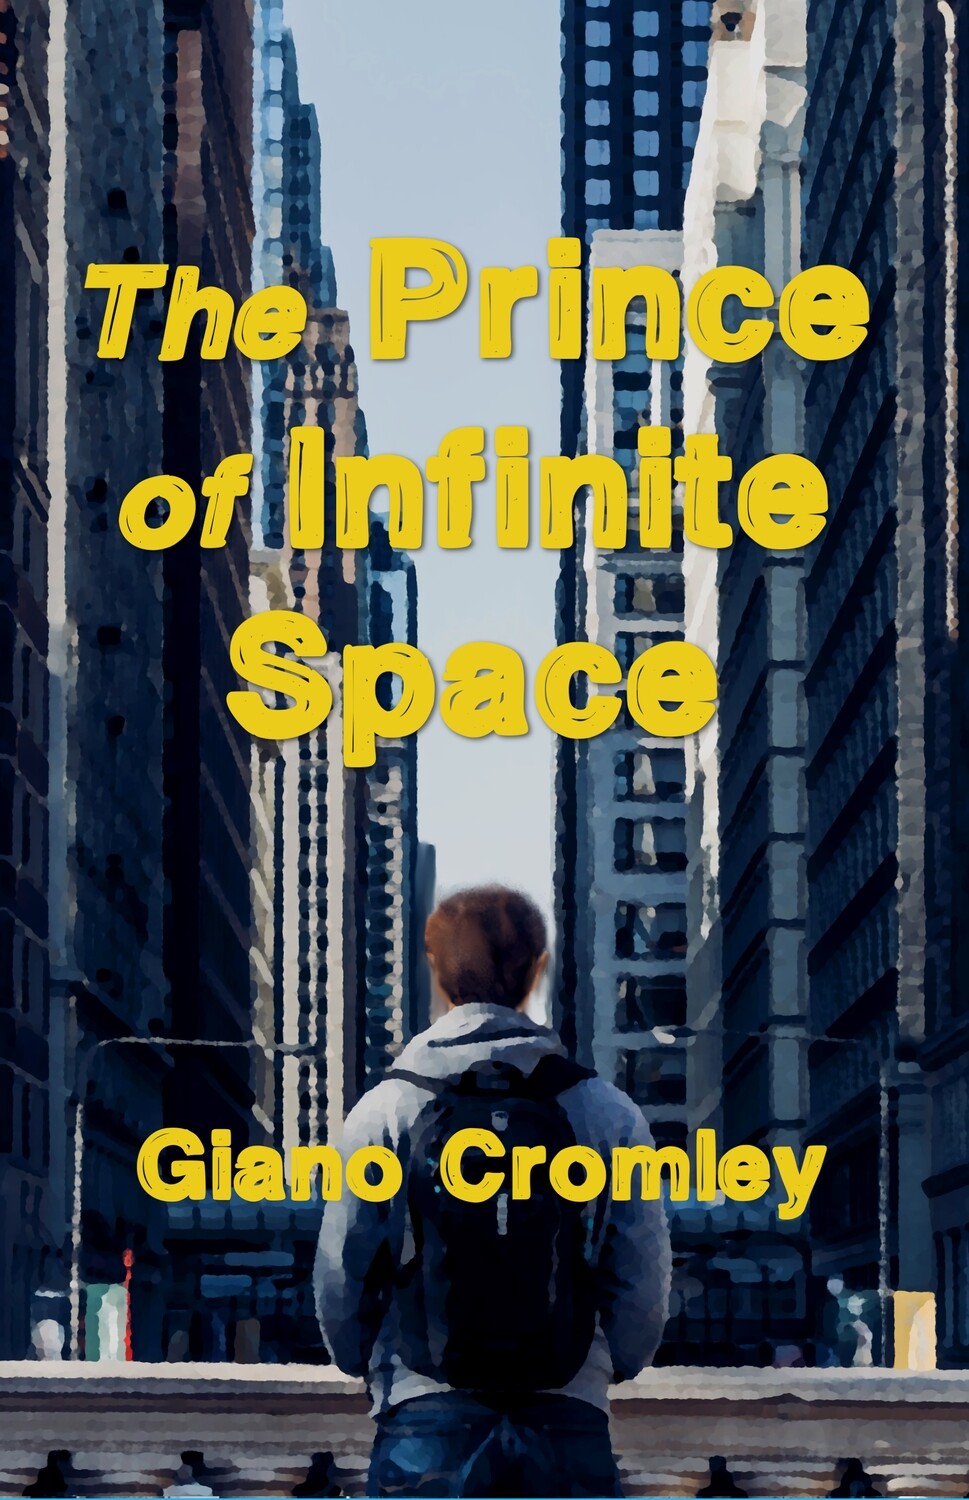 The Prince of Infinite Space, by Giano Cromley